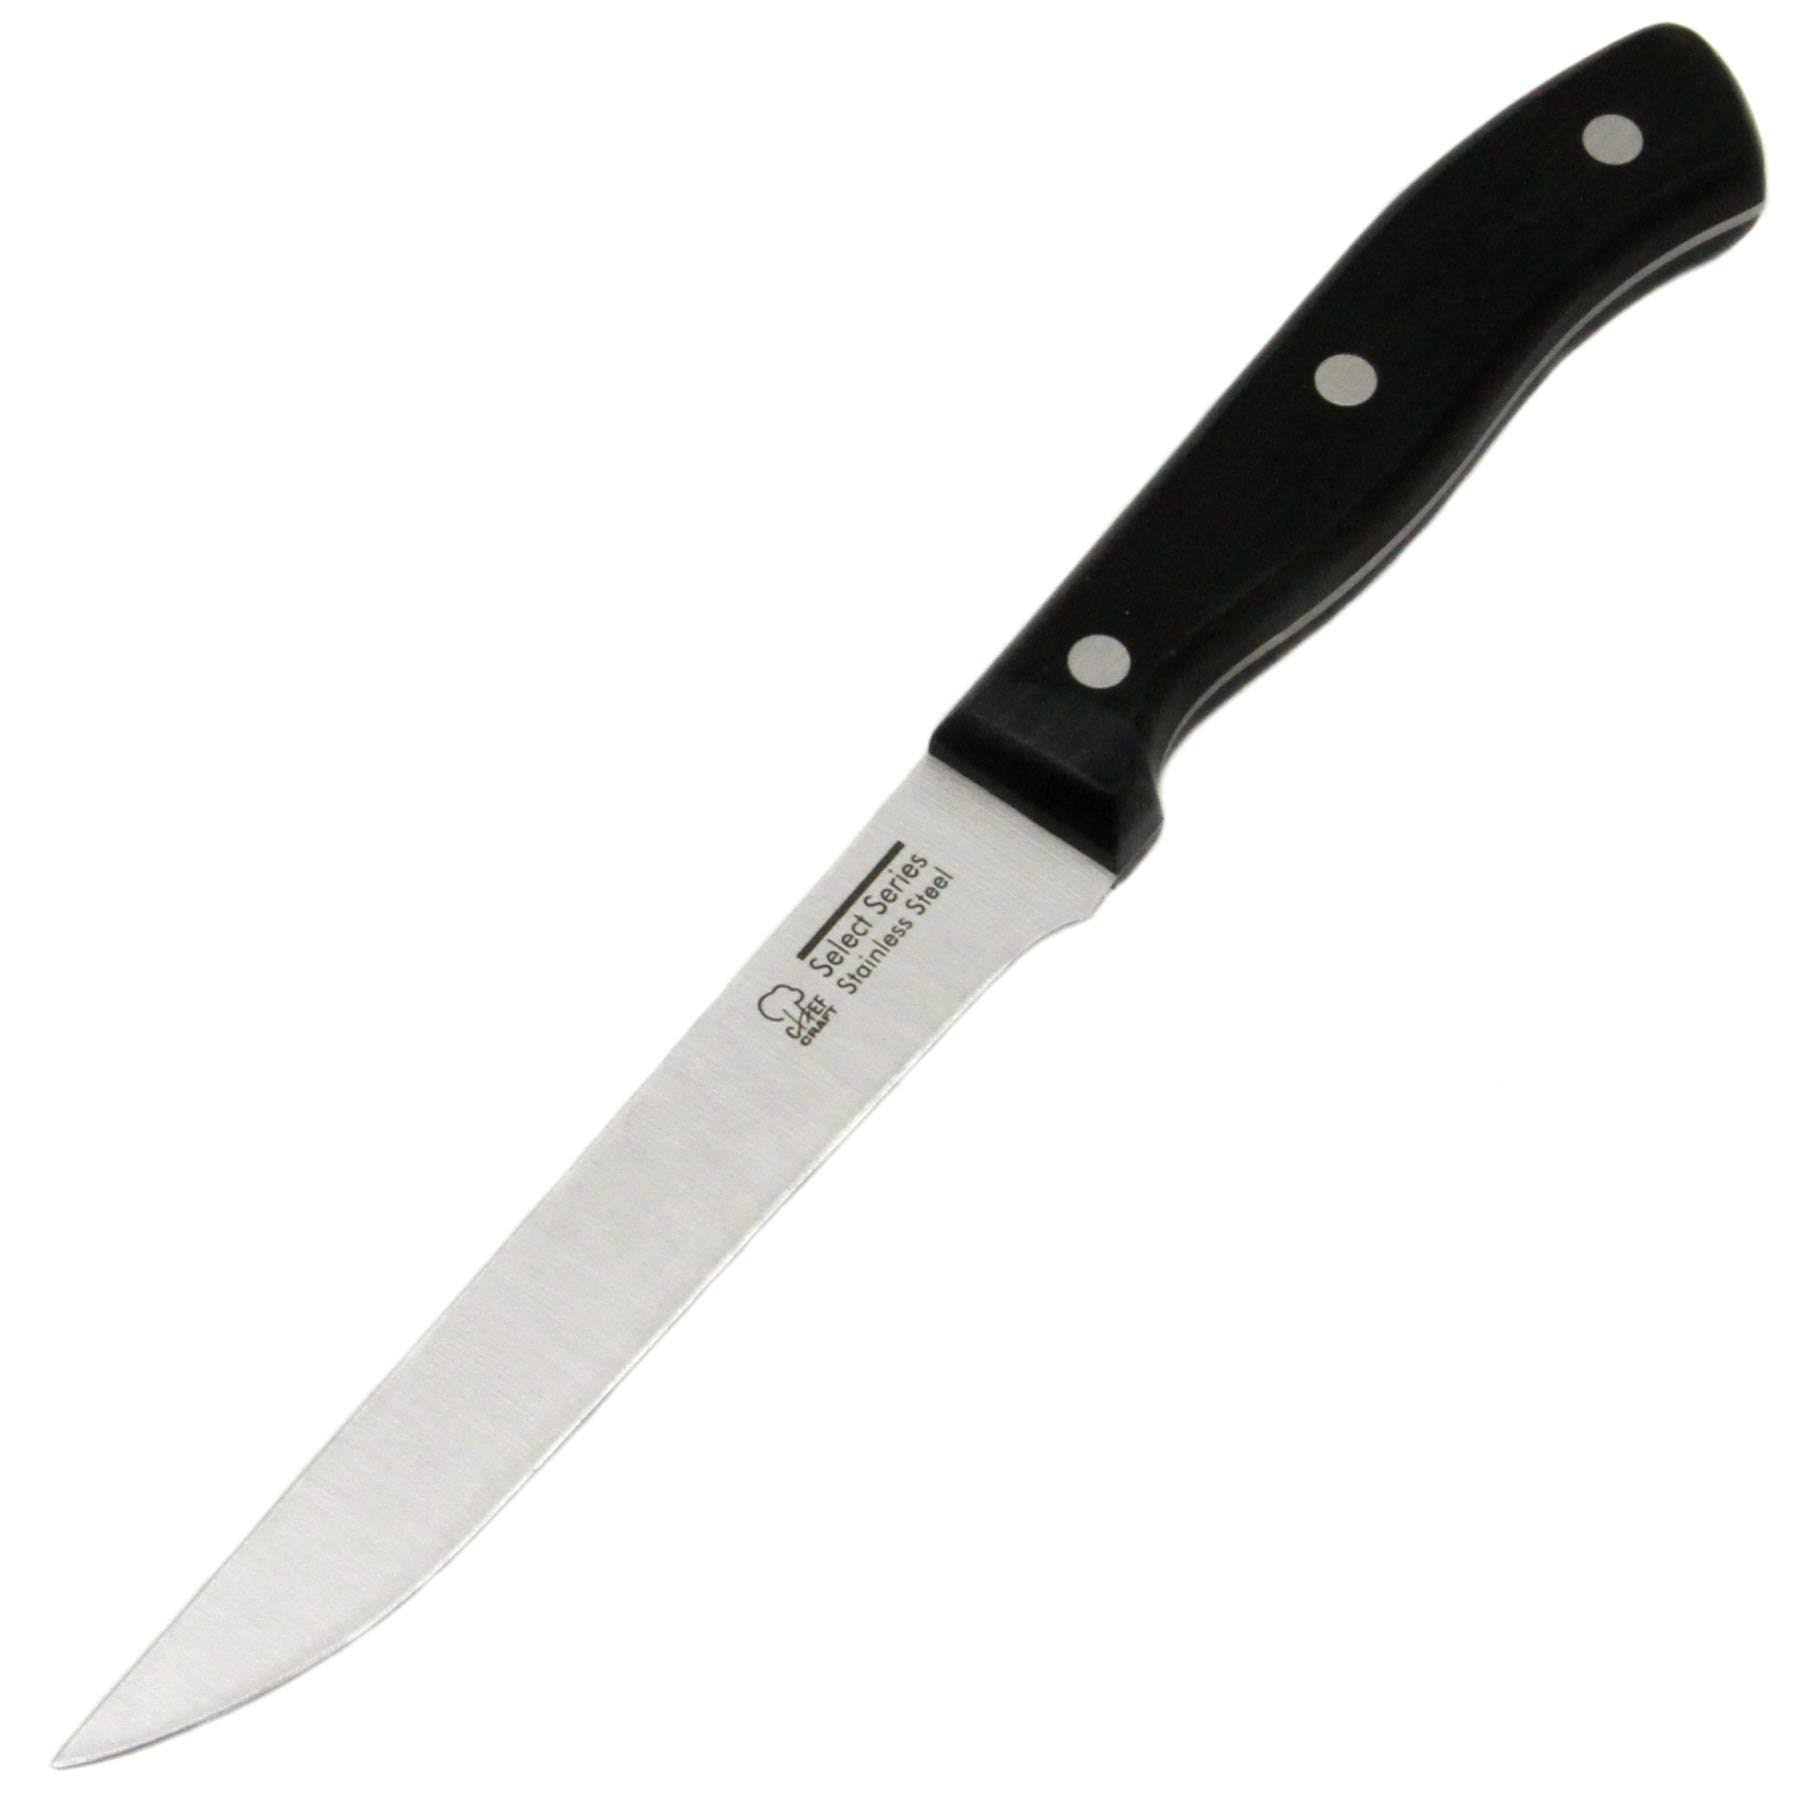 Chef CRAFT 21668 Boning Knife, Stainless Steel Blade, POM Handle